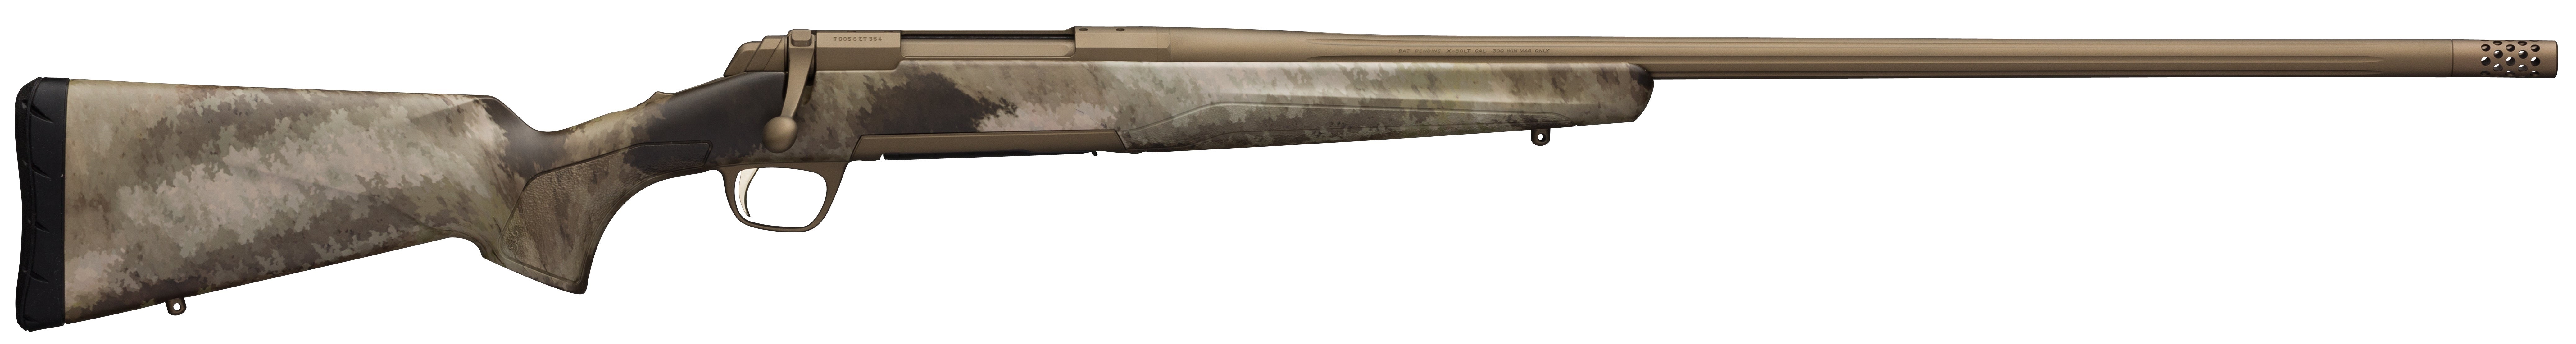 A Browning X-Bolt rifle chambered in 26 Nosler.